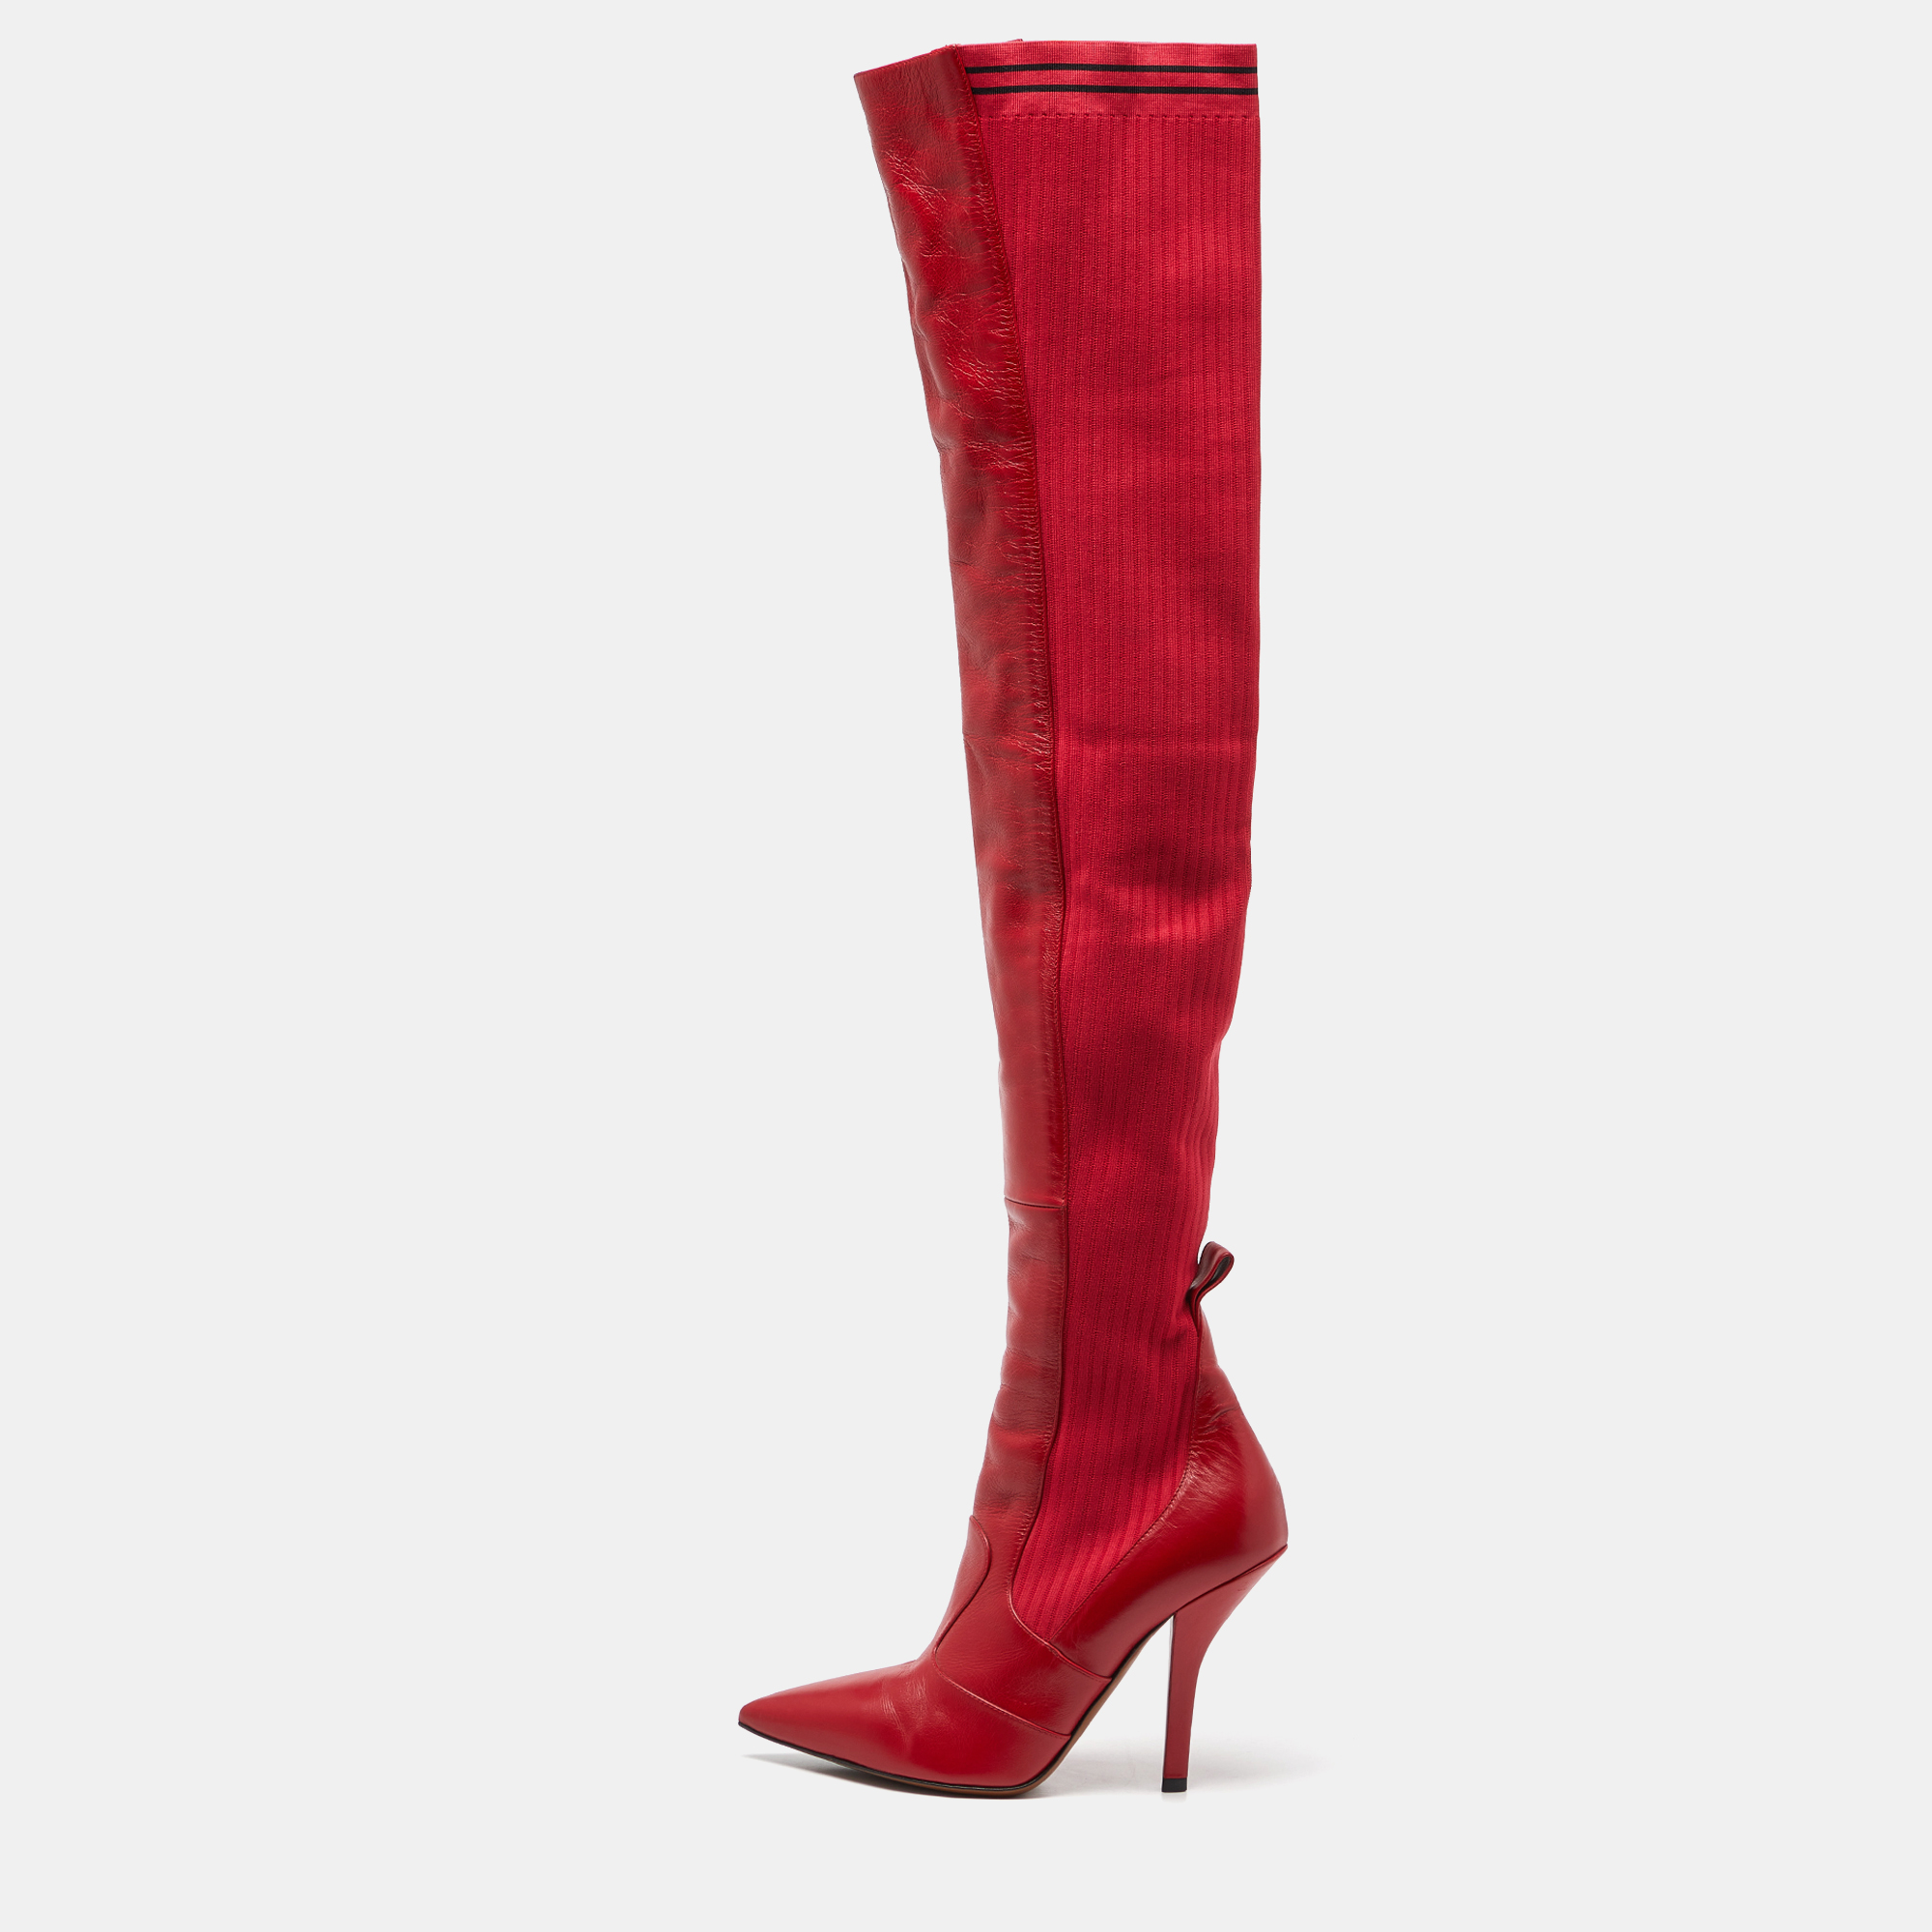 Fendi red leather and fabric rockoko over the knee length pointed toe boots size 40